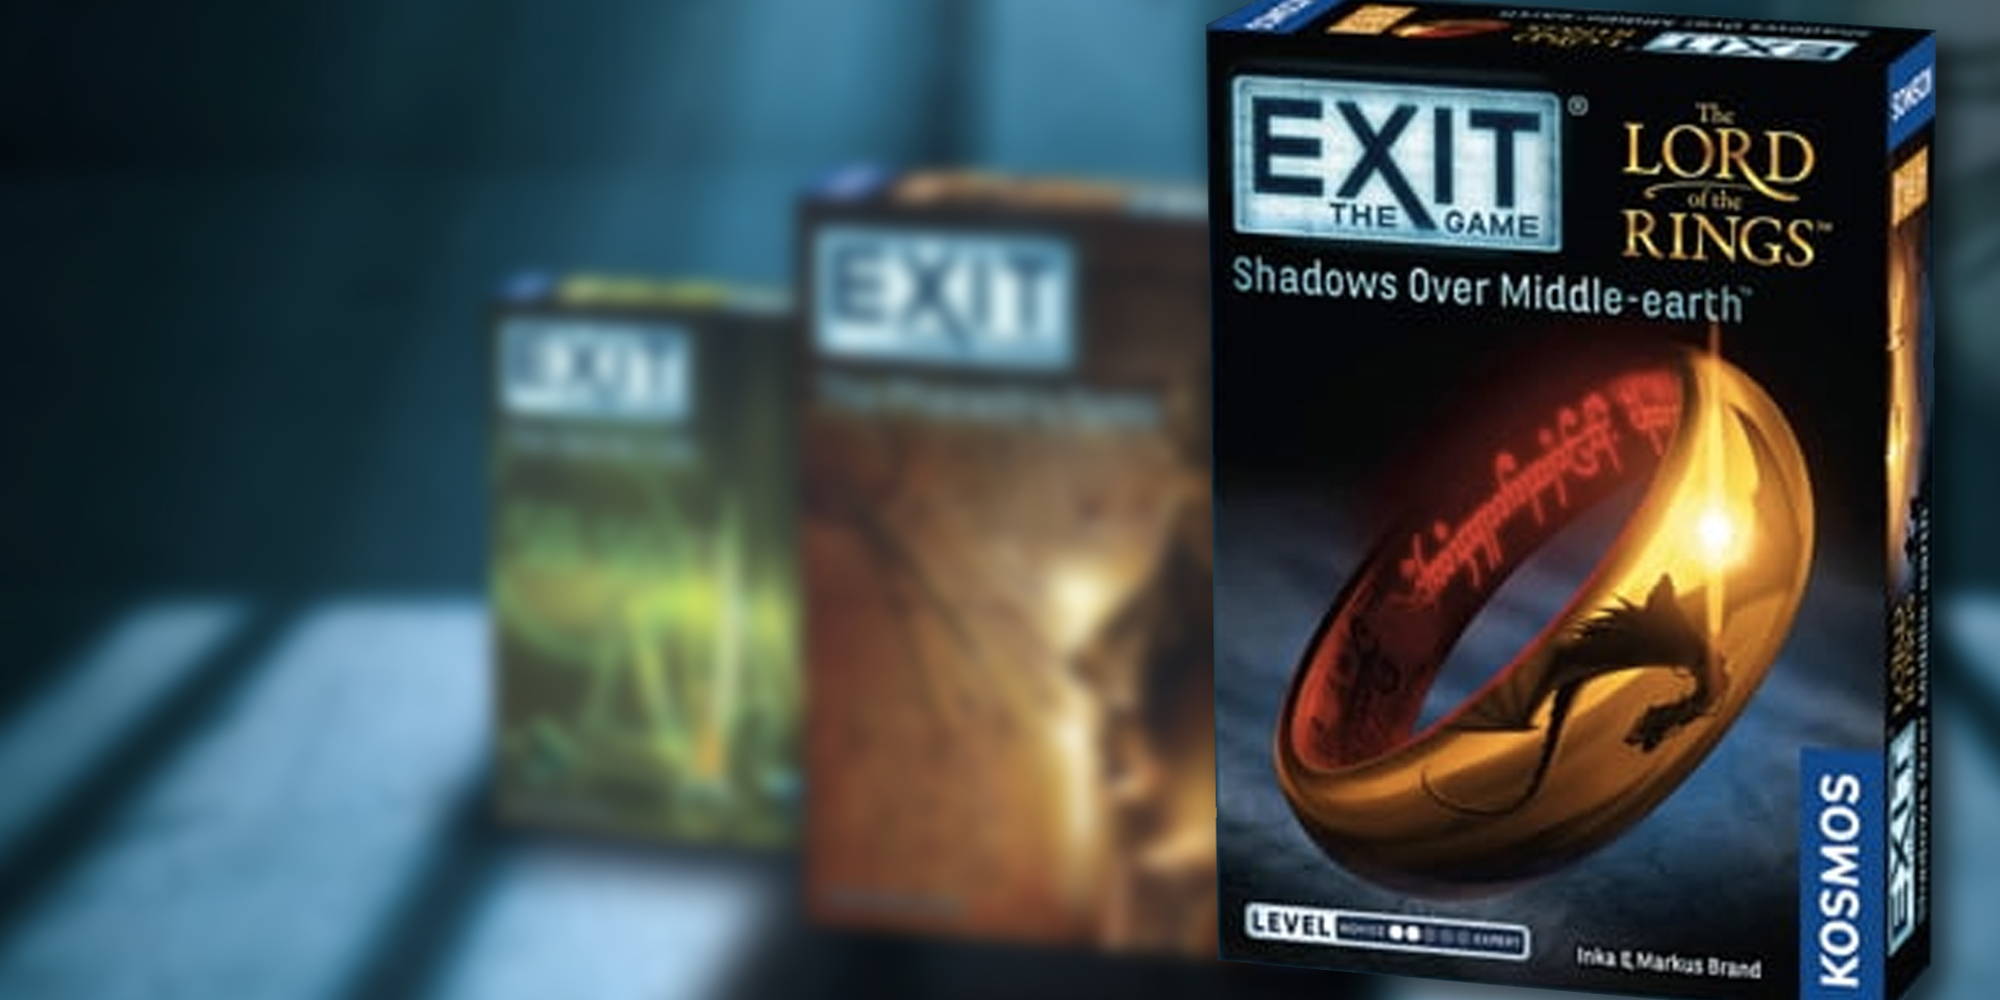 Be sure to check out EXIT: The Lord of the Rings – Shadows Over Middle-Earth